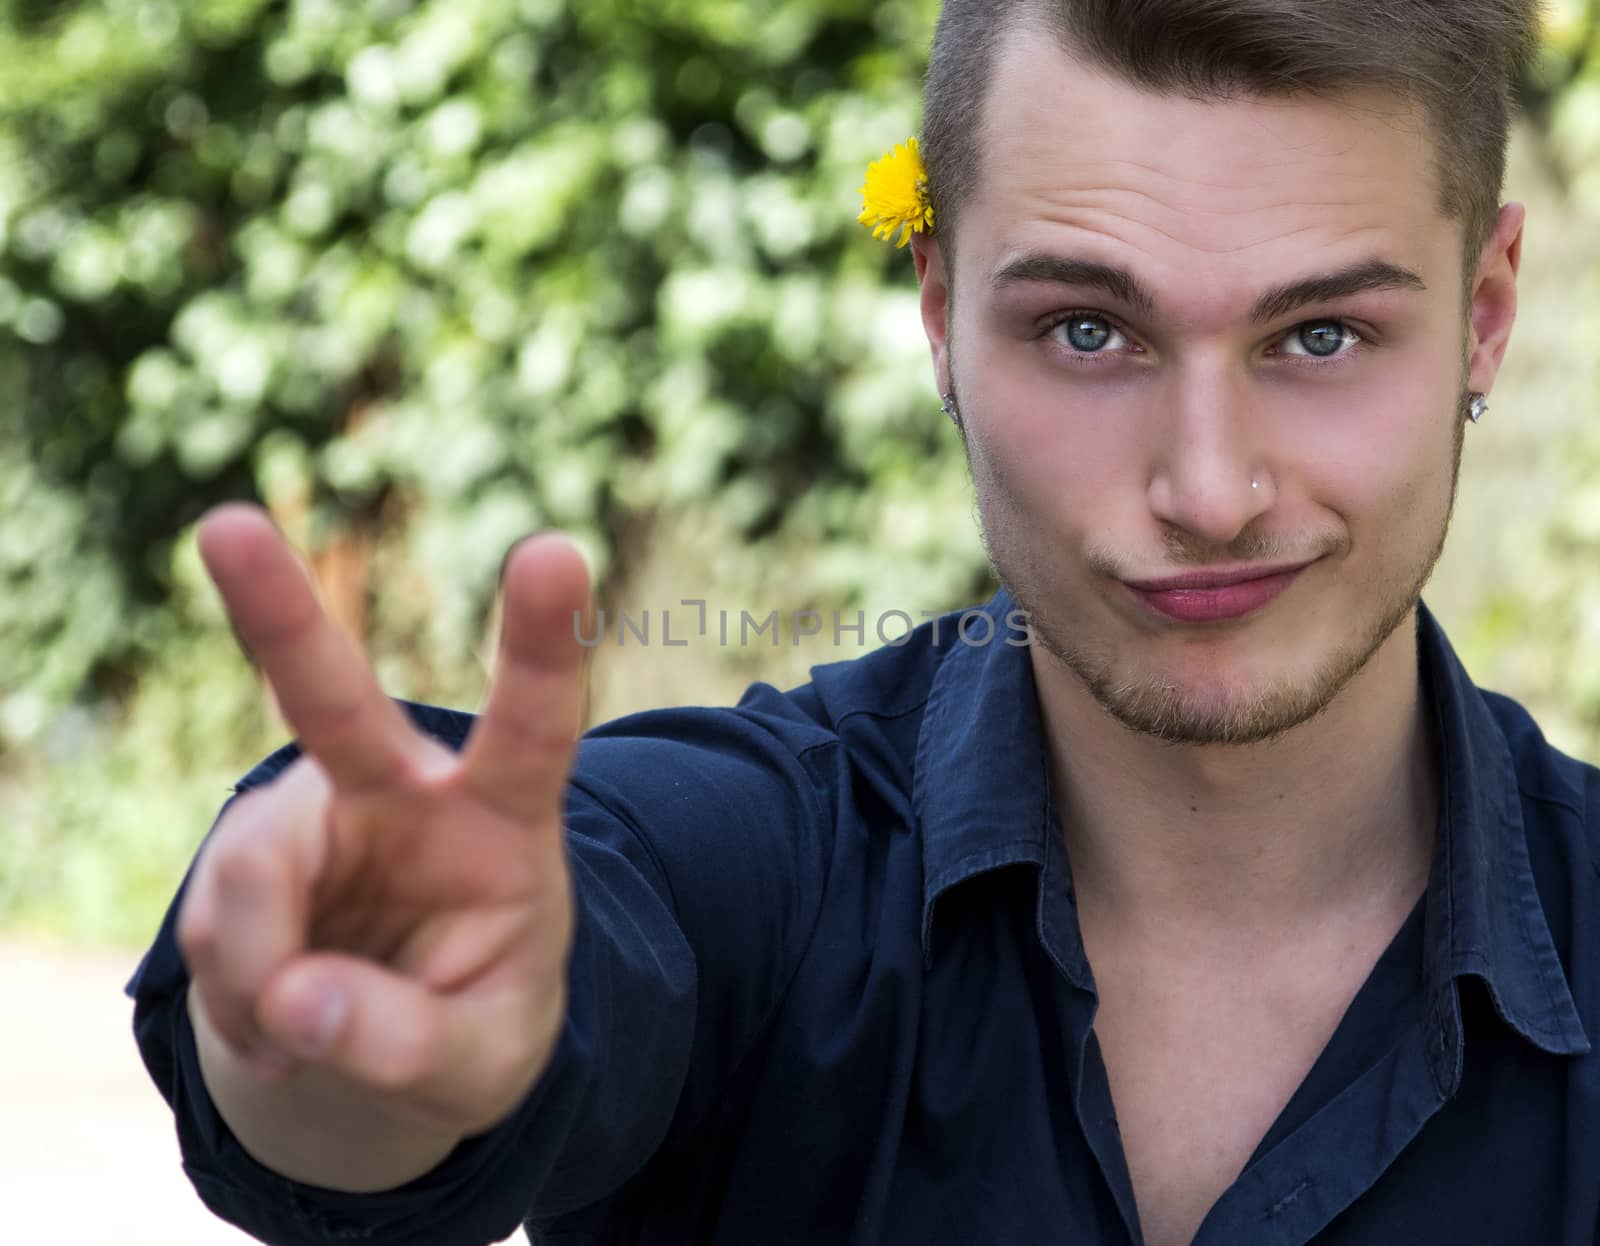 Handsome blond young man outdoors in nature doing peace sign with fingers